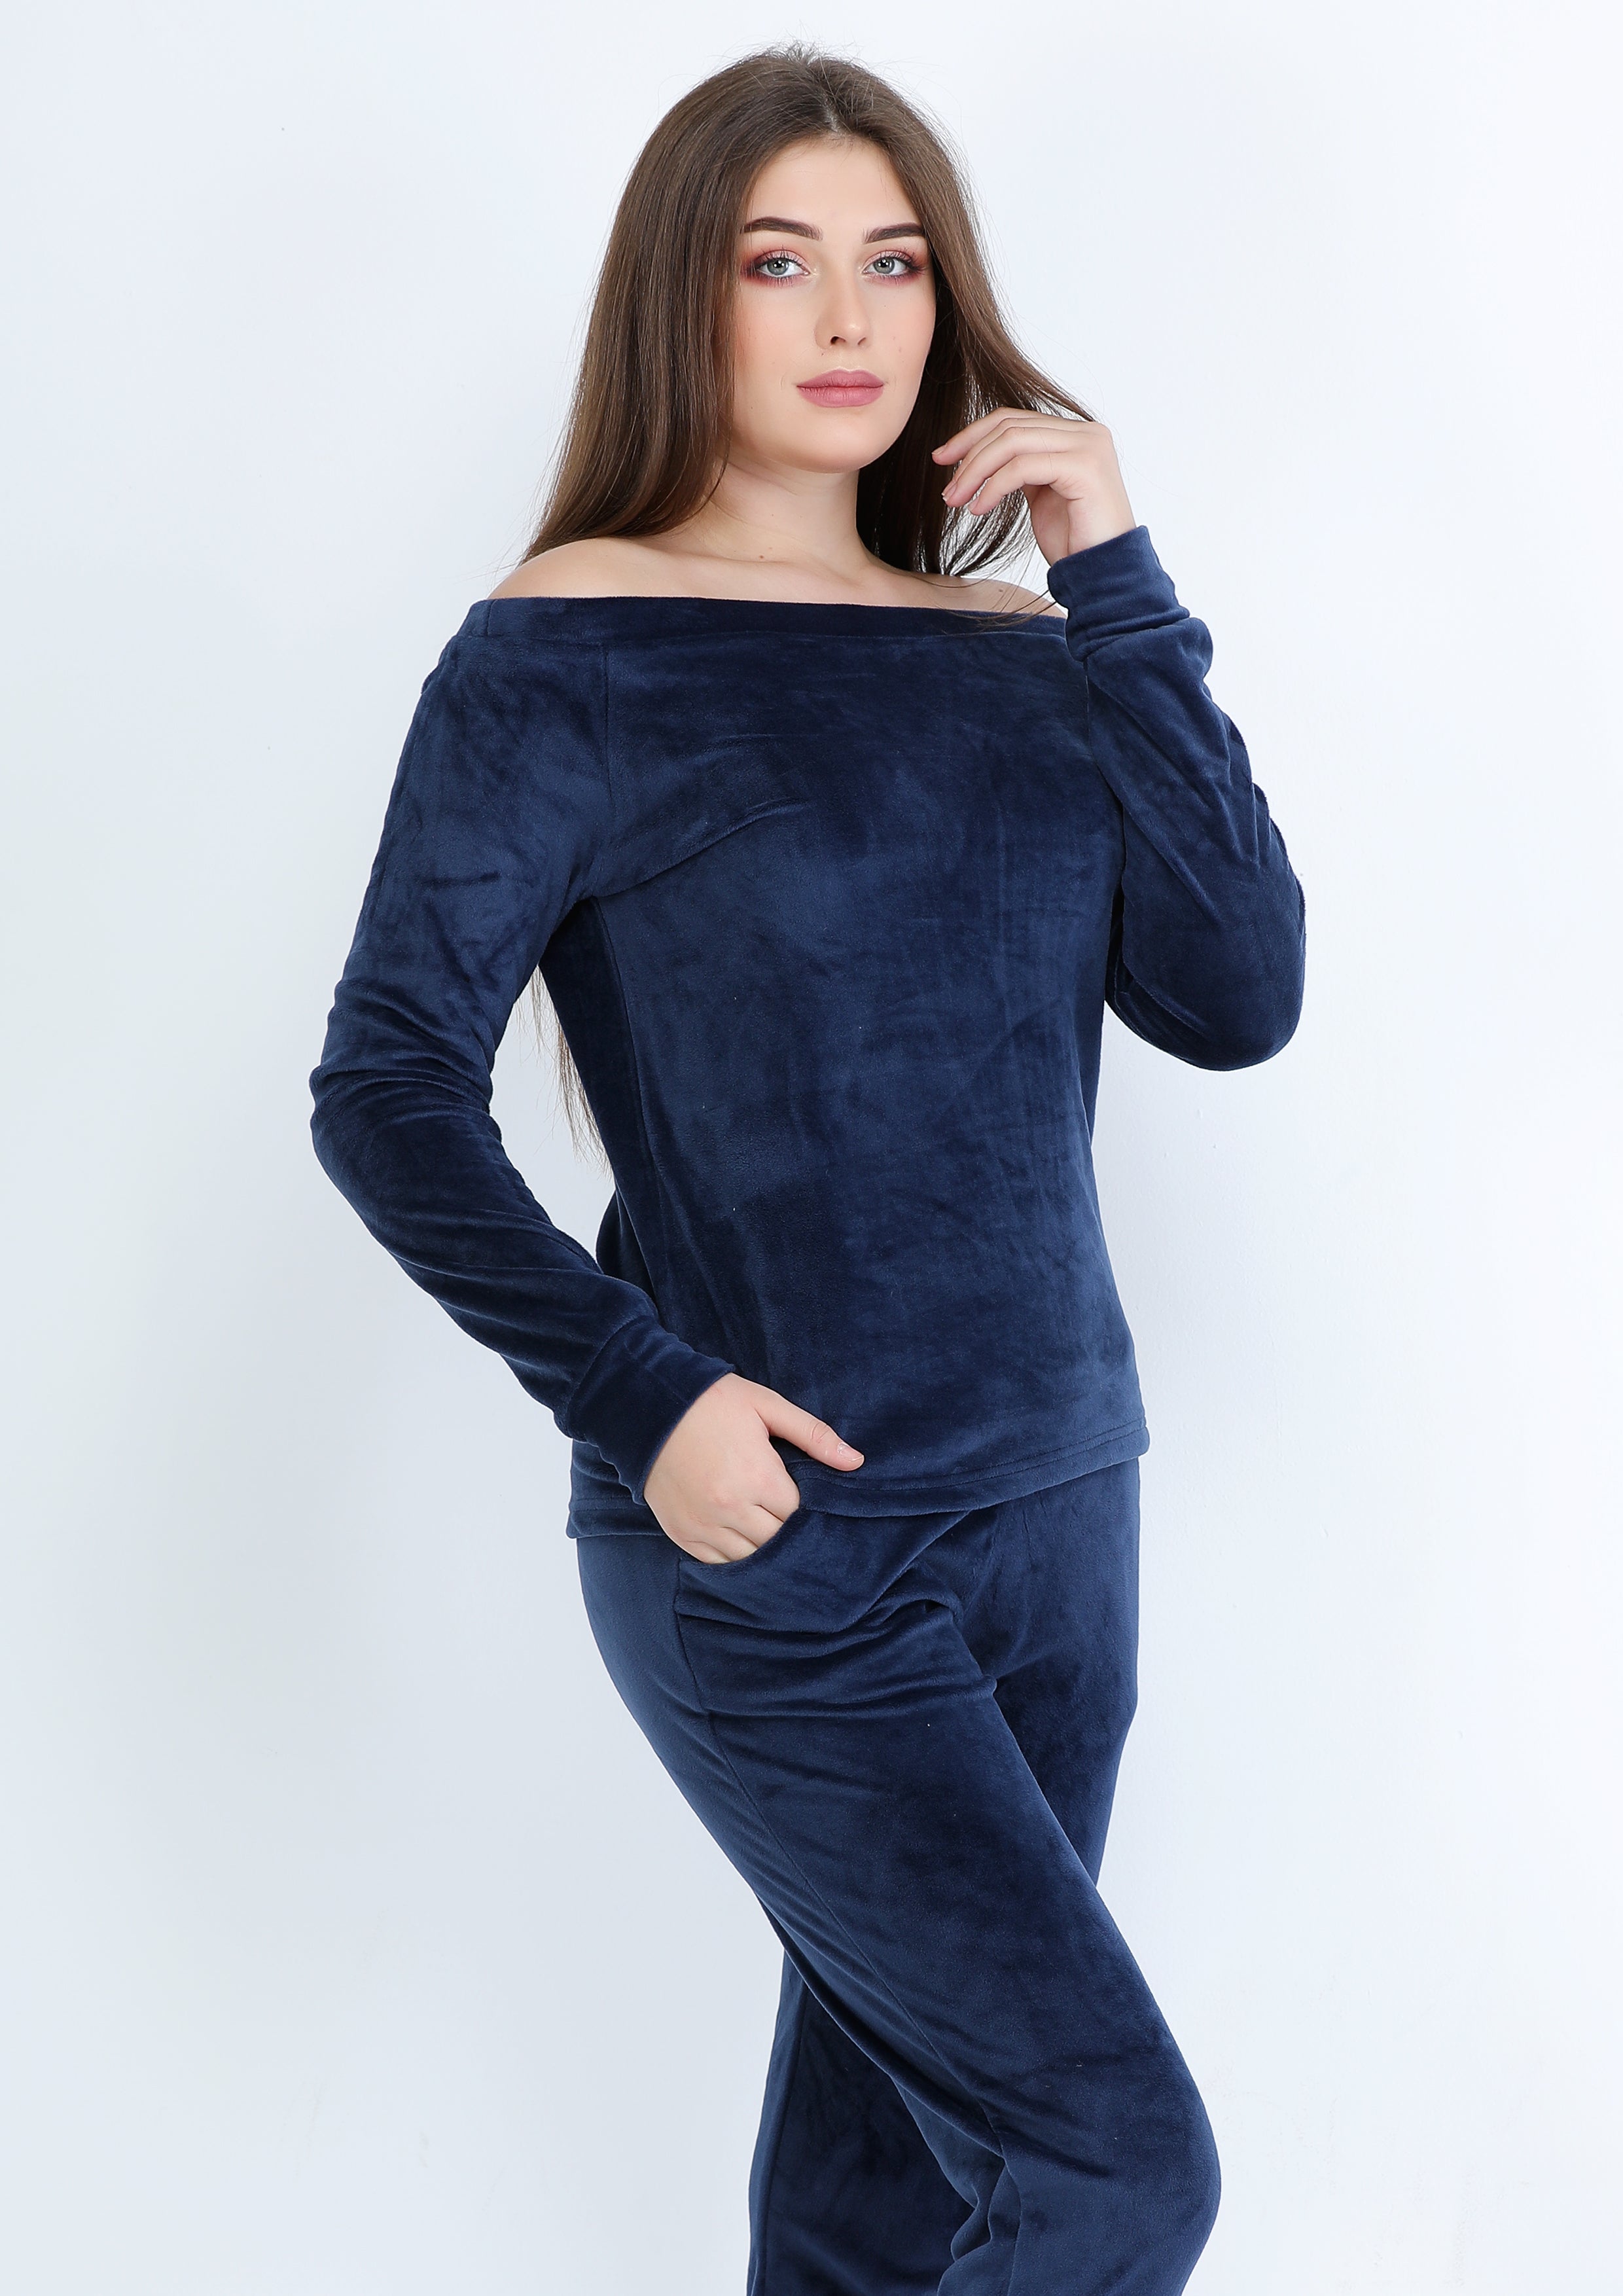 Plain blue navy Heidi pajamas with lining on both sides and bare shoulders